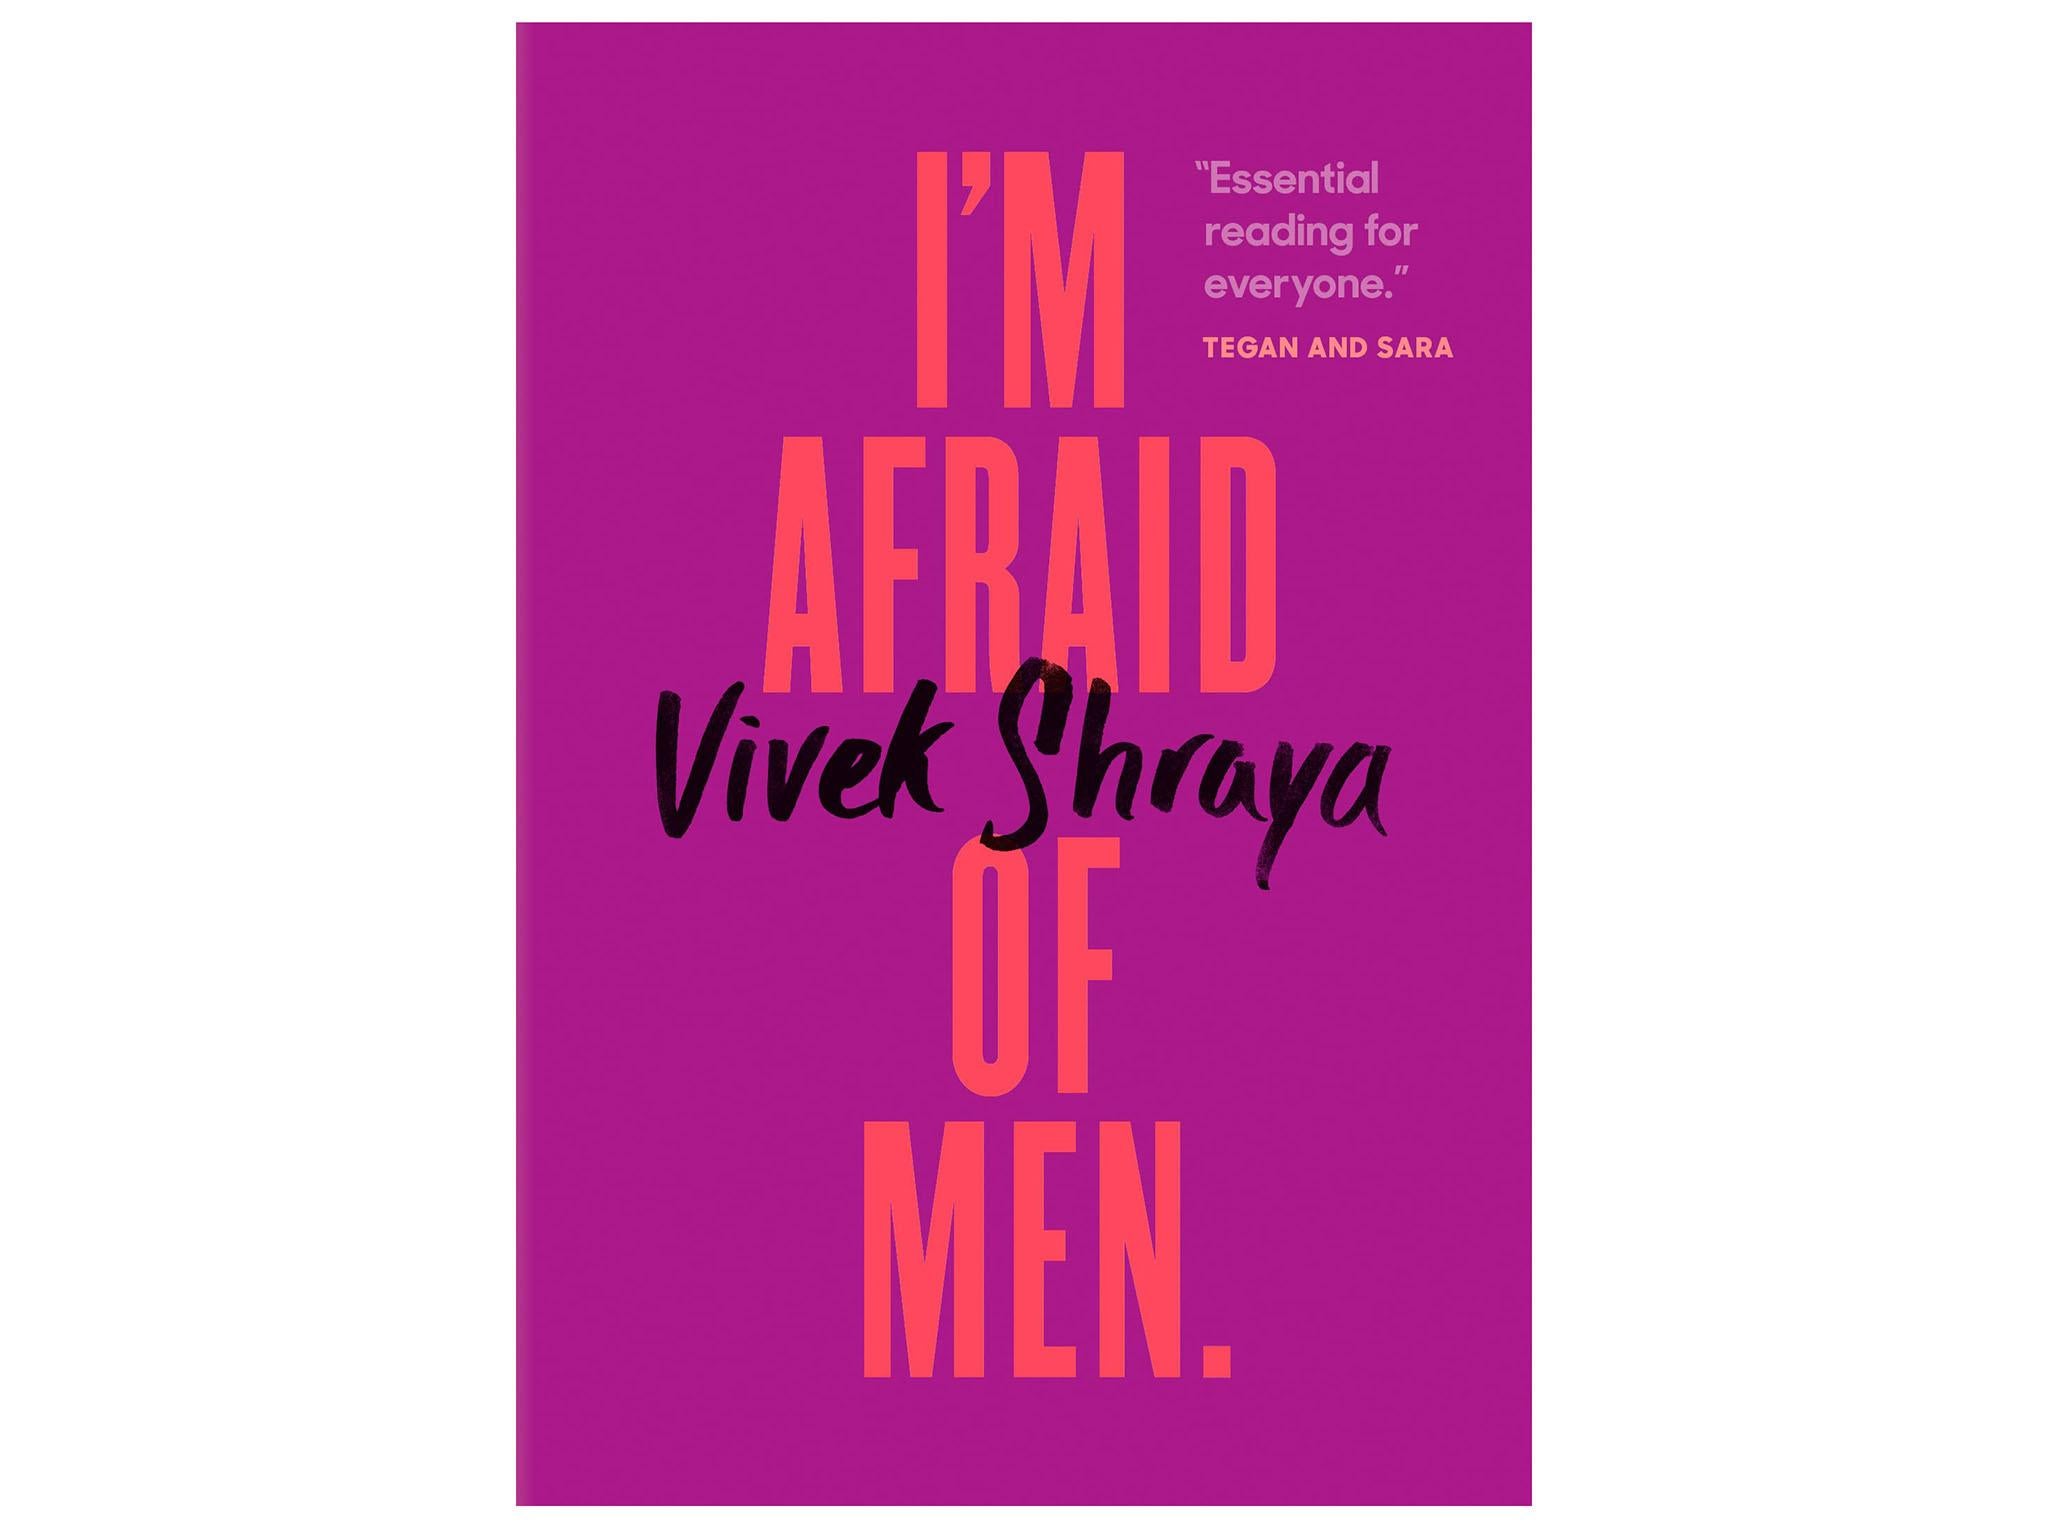 Vivek Shraya is a trans woman of colour, presents the transmisogyny she has experienced and the boundaries and queer spaces that are needed in her book (Amazon)